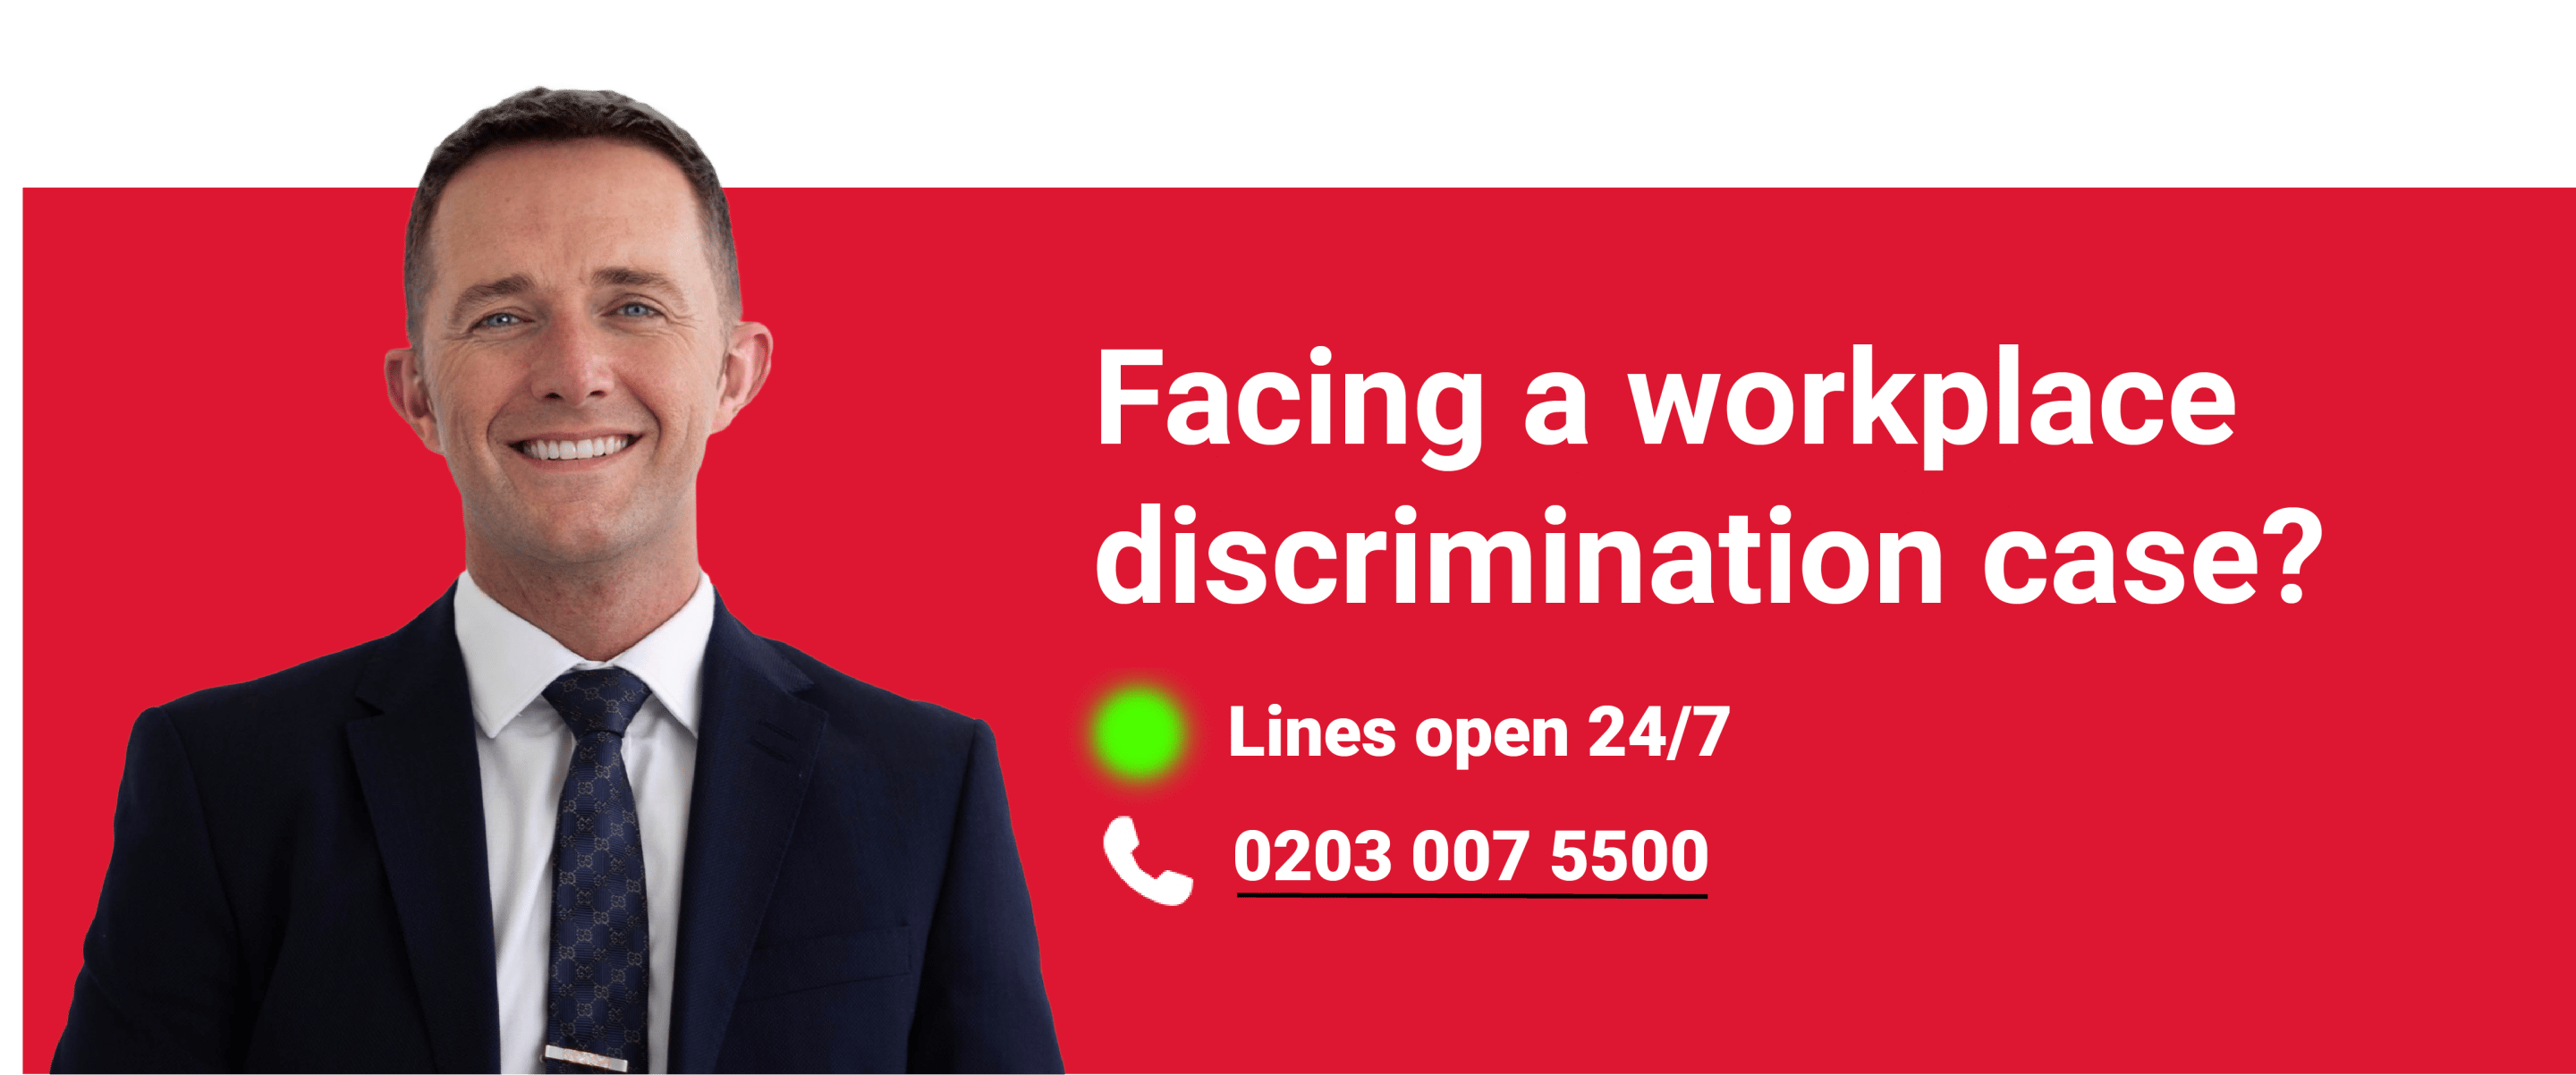 call to action on workplace discrimination case